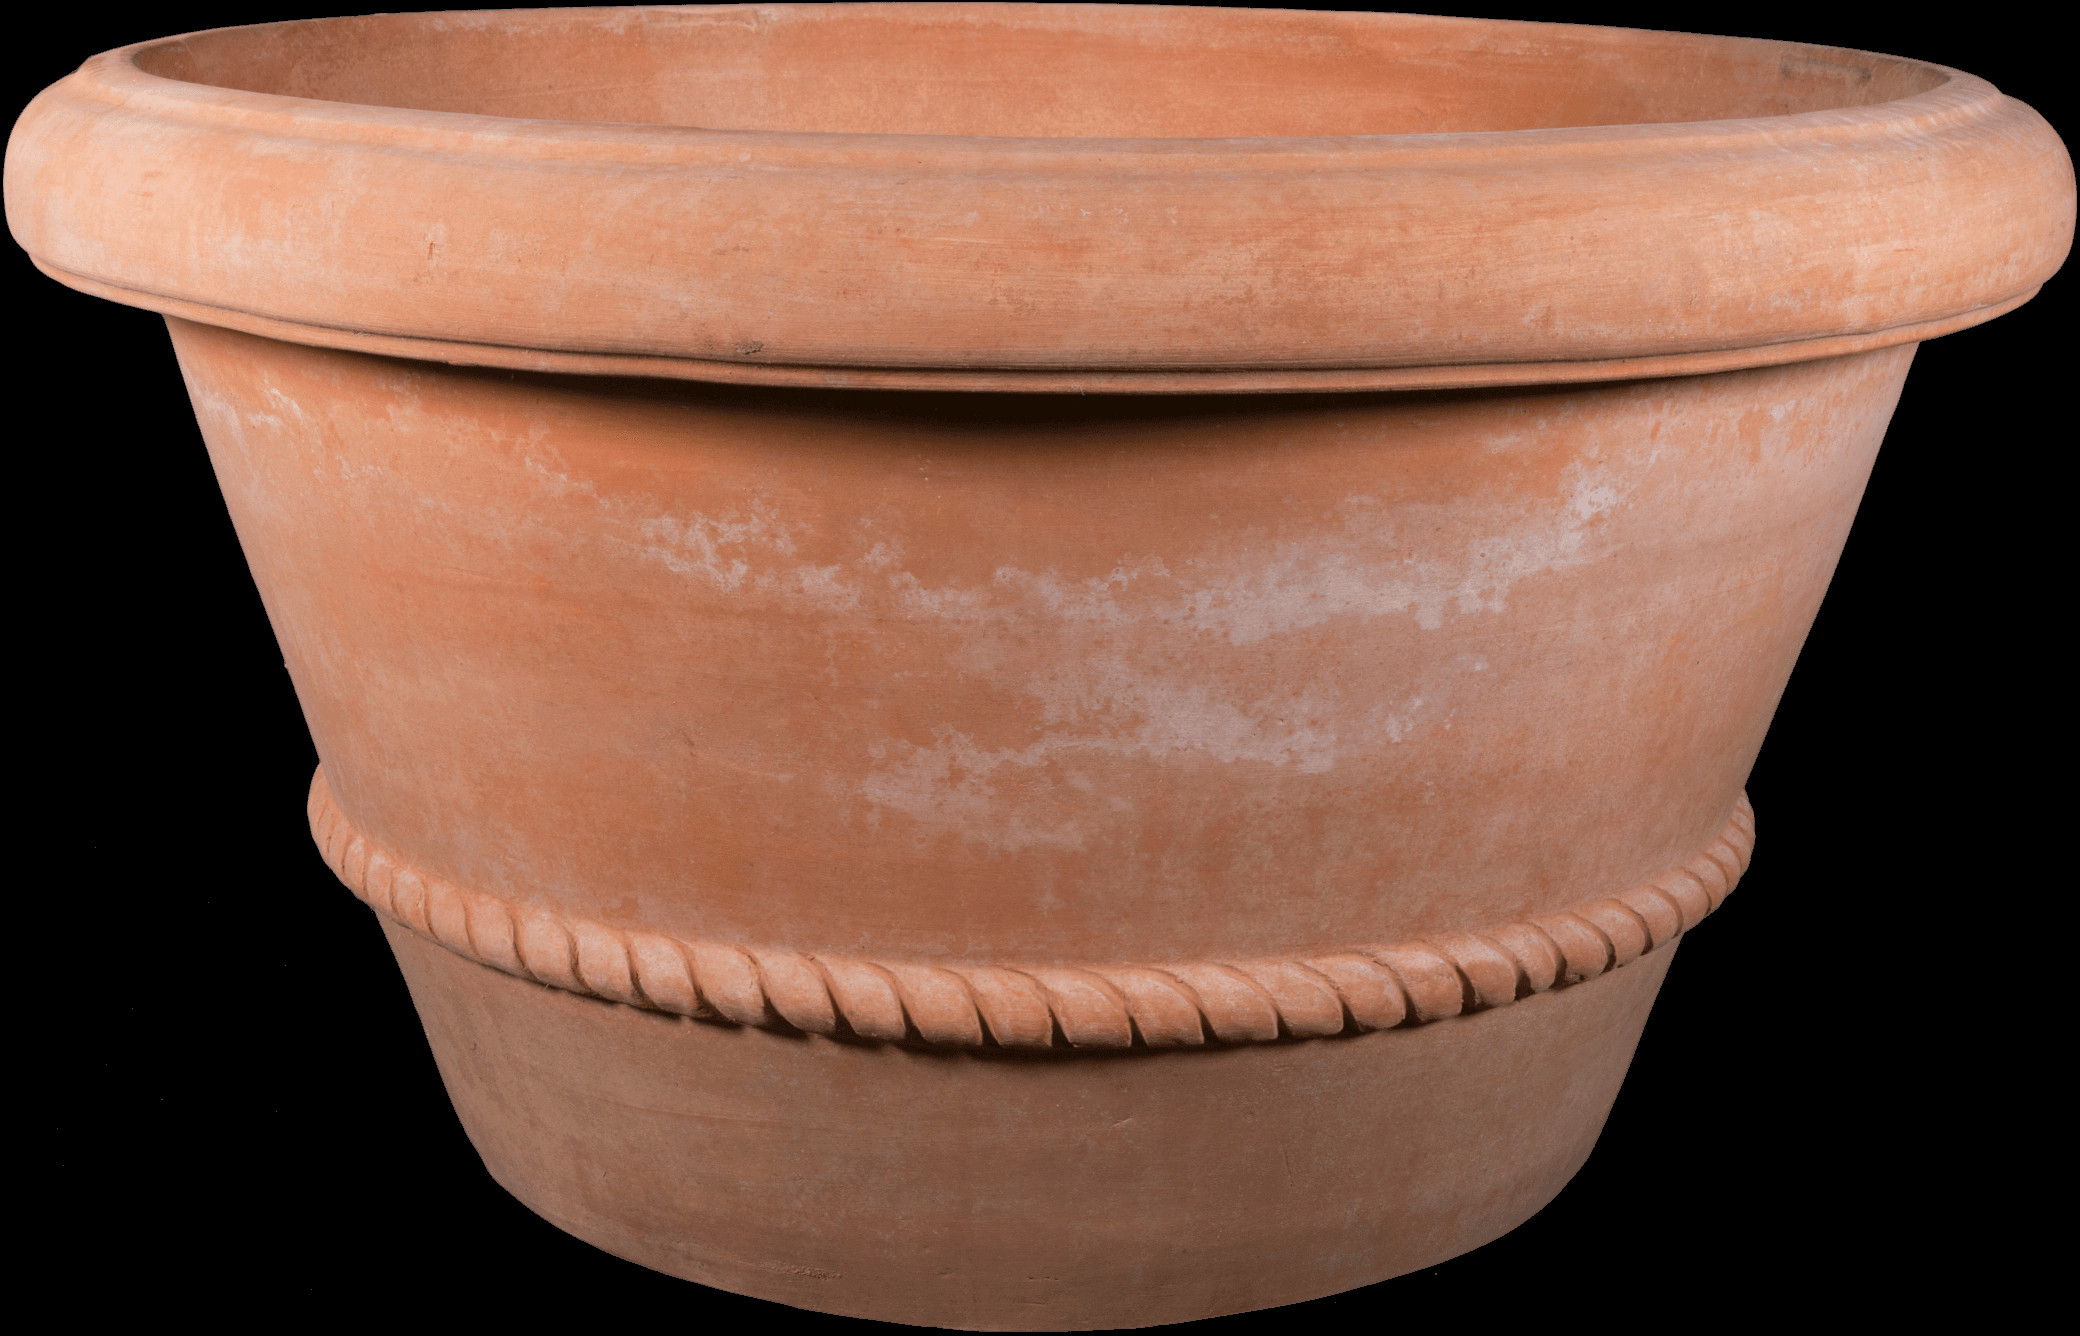 27 Stylish 32 Inch Cylinder Vase 2024 free download 32 inch cylinder vase of terracotta vases for sale from impruneta tuscan imports with 628